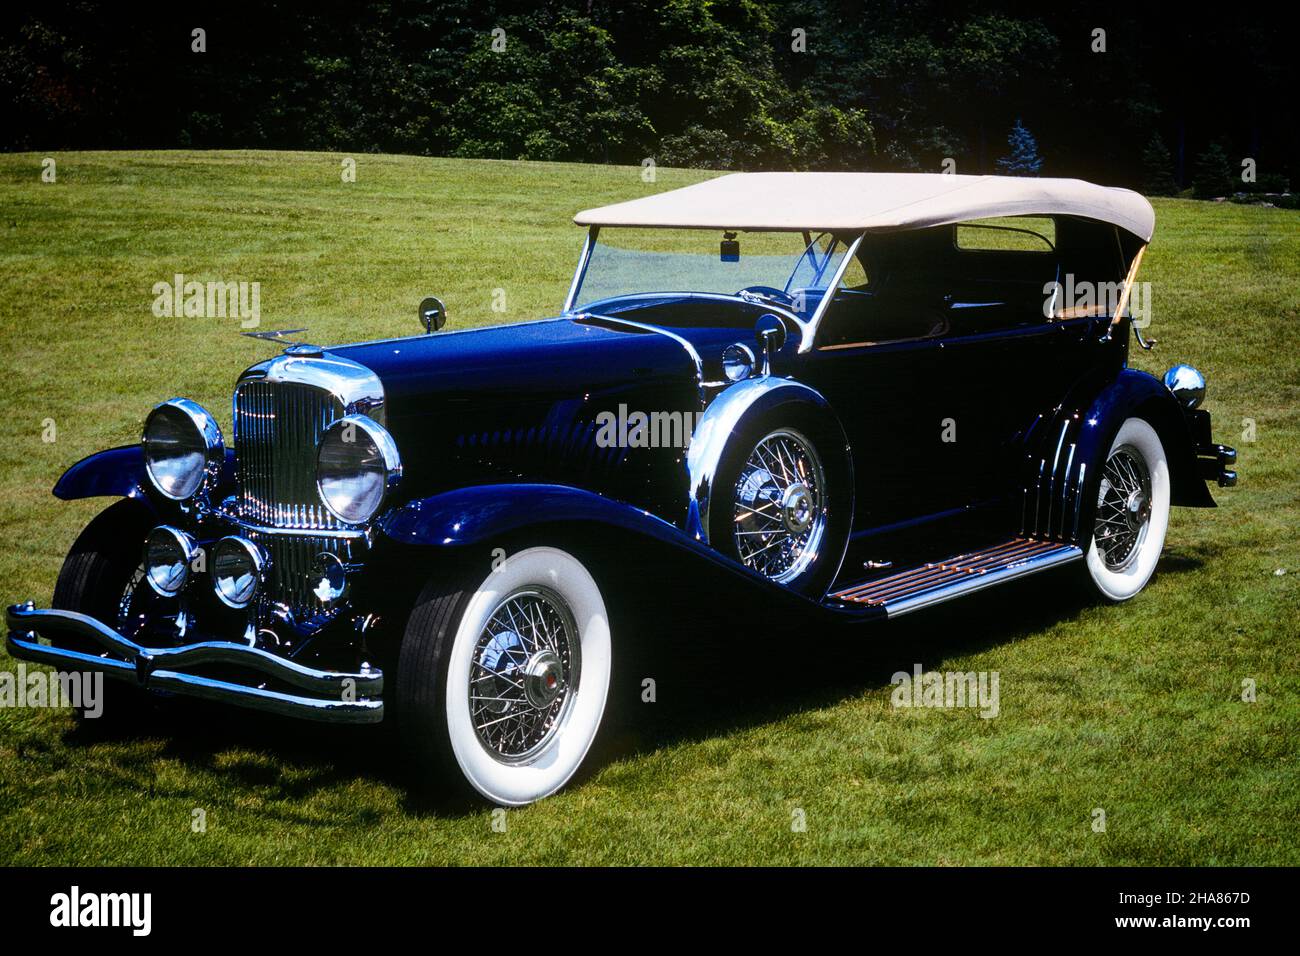 1920s ANTIQUE CAR A MODEL J DUESENBERG DUAL COWL PHAETON 1928 - 057797 RSS001 HARS VEHICLES INDIANAPOLIS PHAETON CLASSY STATUS SYMBOL TIRES WELL-TO-DO 1928 EXPENSIVE OLD FASHIONED RARE Stock Photo